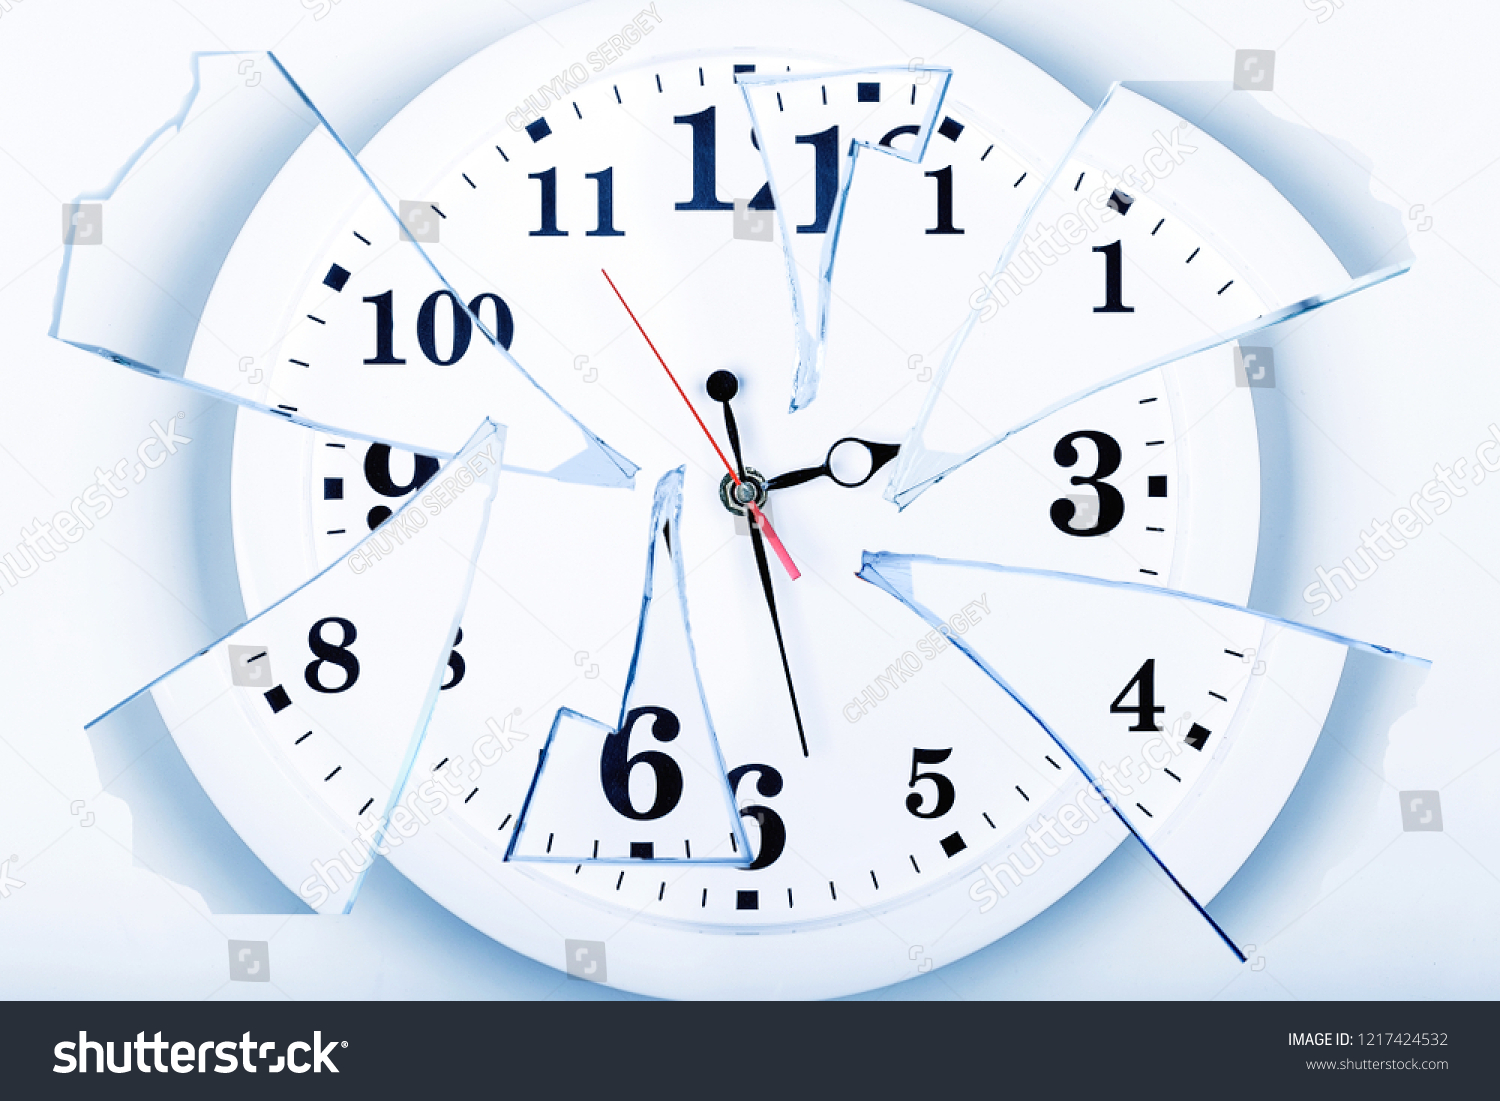 clock with broken glass on a white background. chaos time. time passing concept. #1217424532